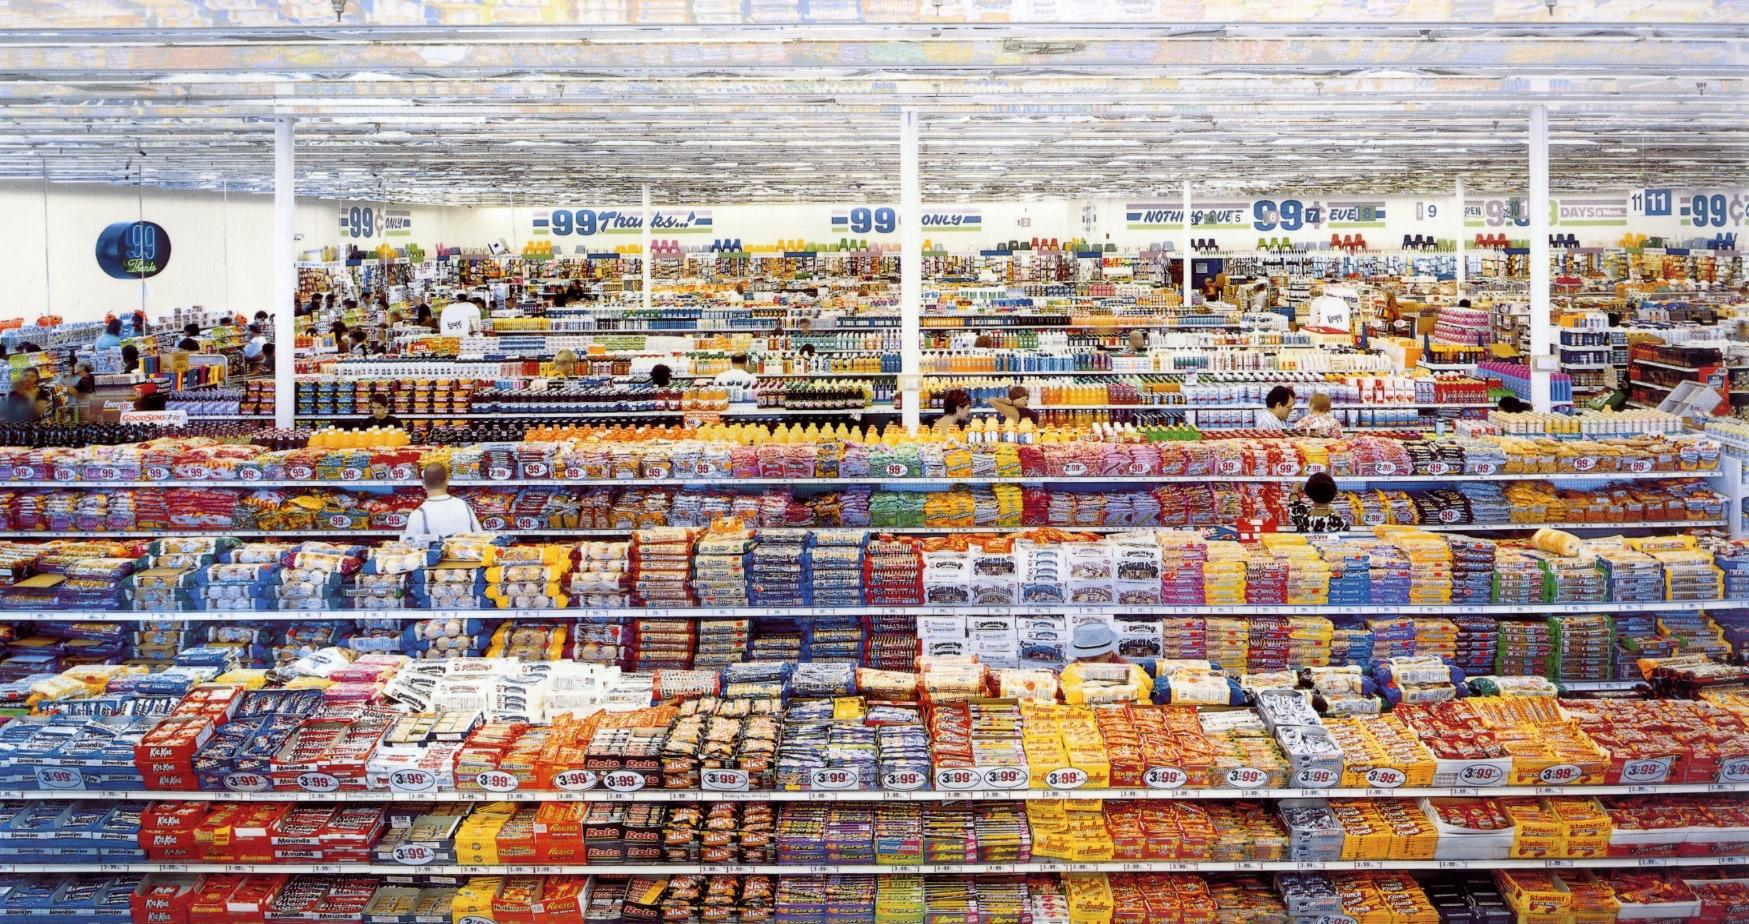 Andreas gursky 99 cent 20011